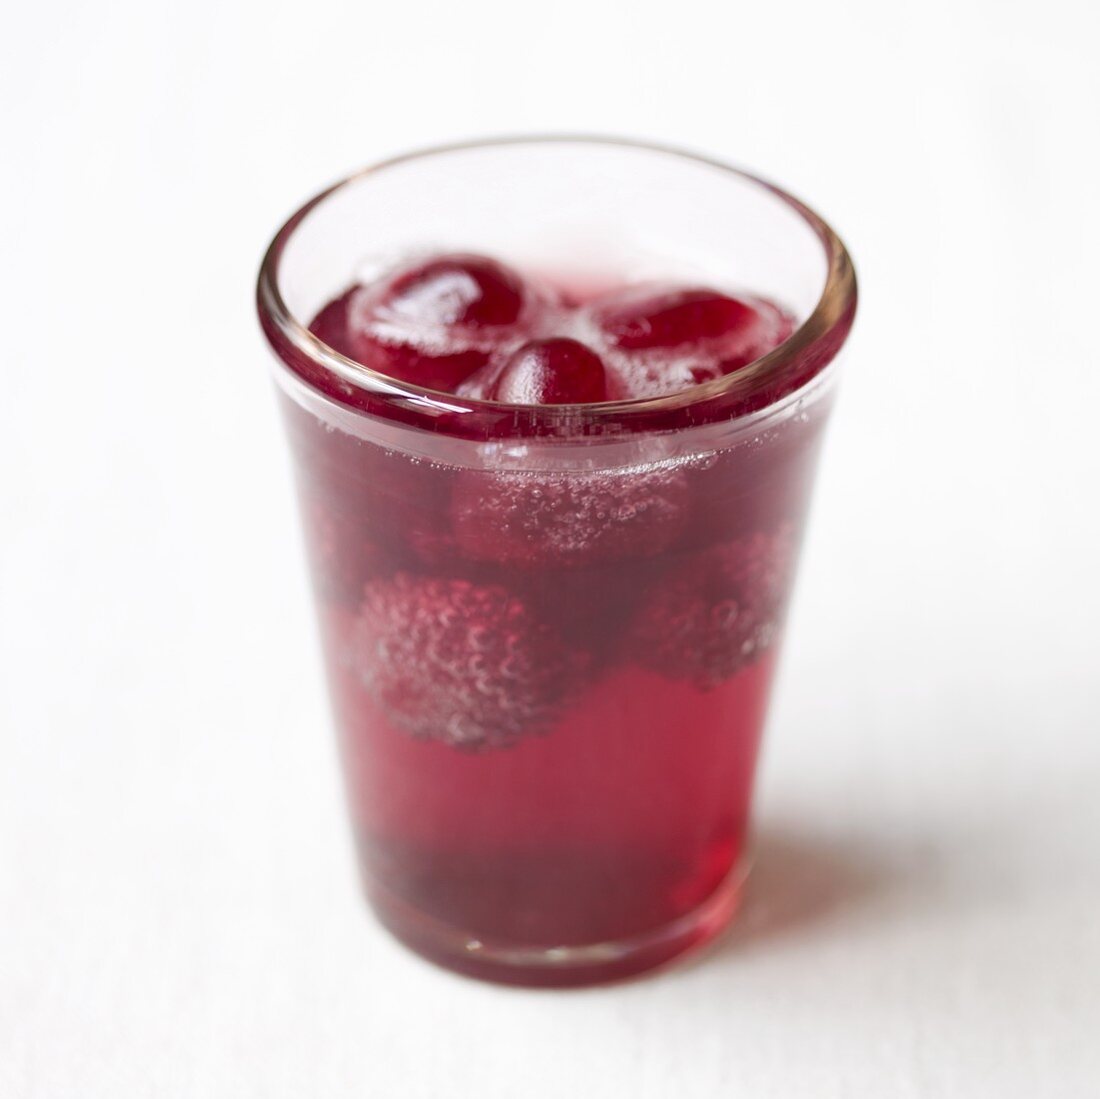 A glass of red lemonade with raspberries and cherries